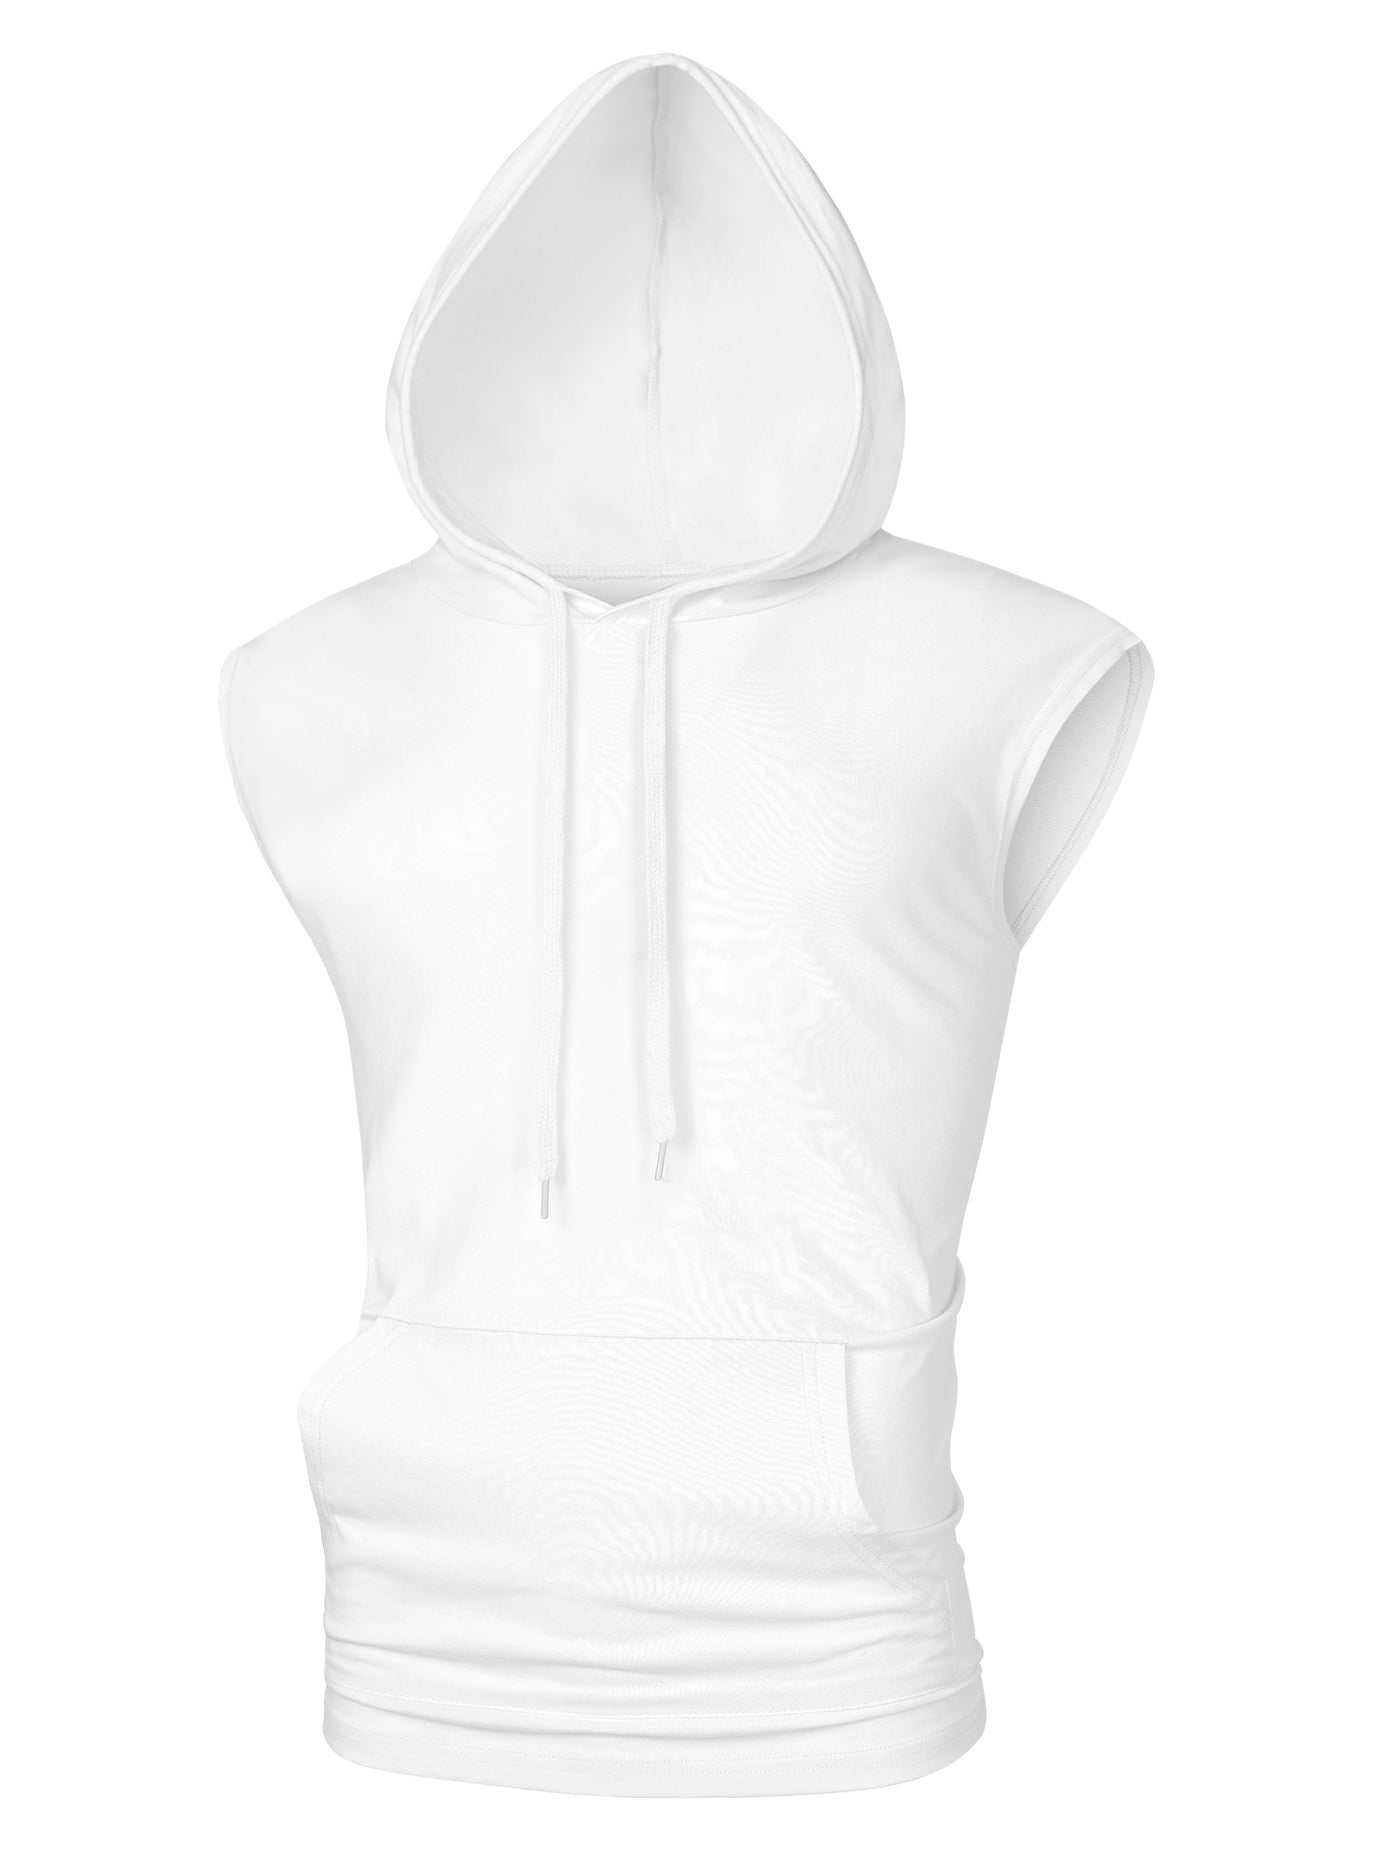 Bublédon Casual Gym Athletic Sleeveless Tank Tops Hooded Vests